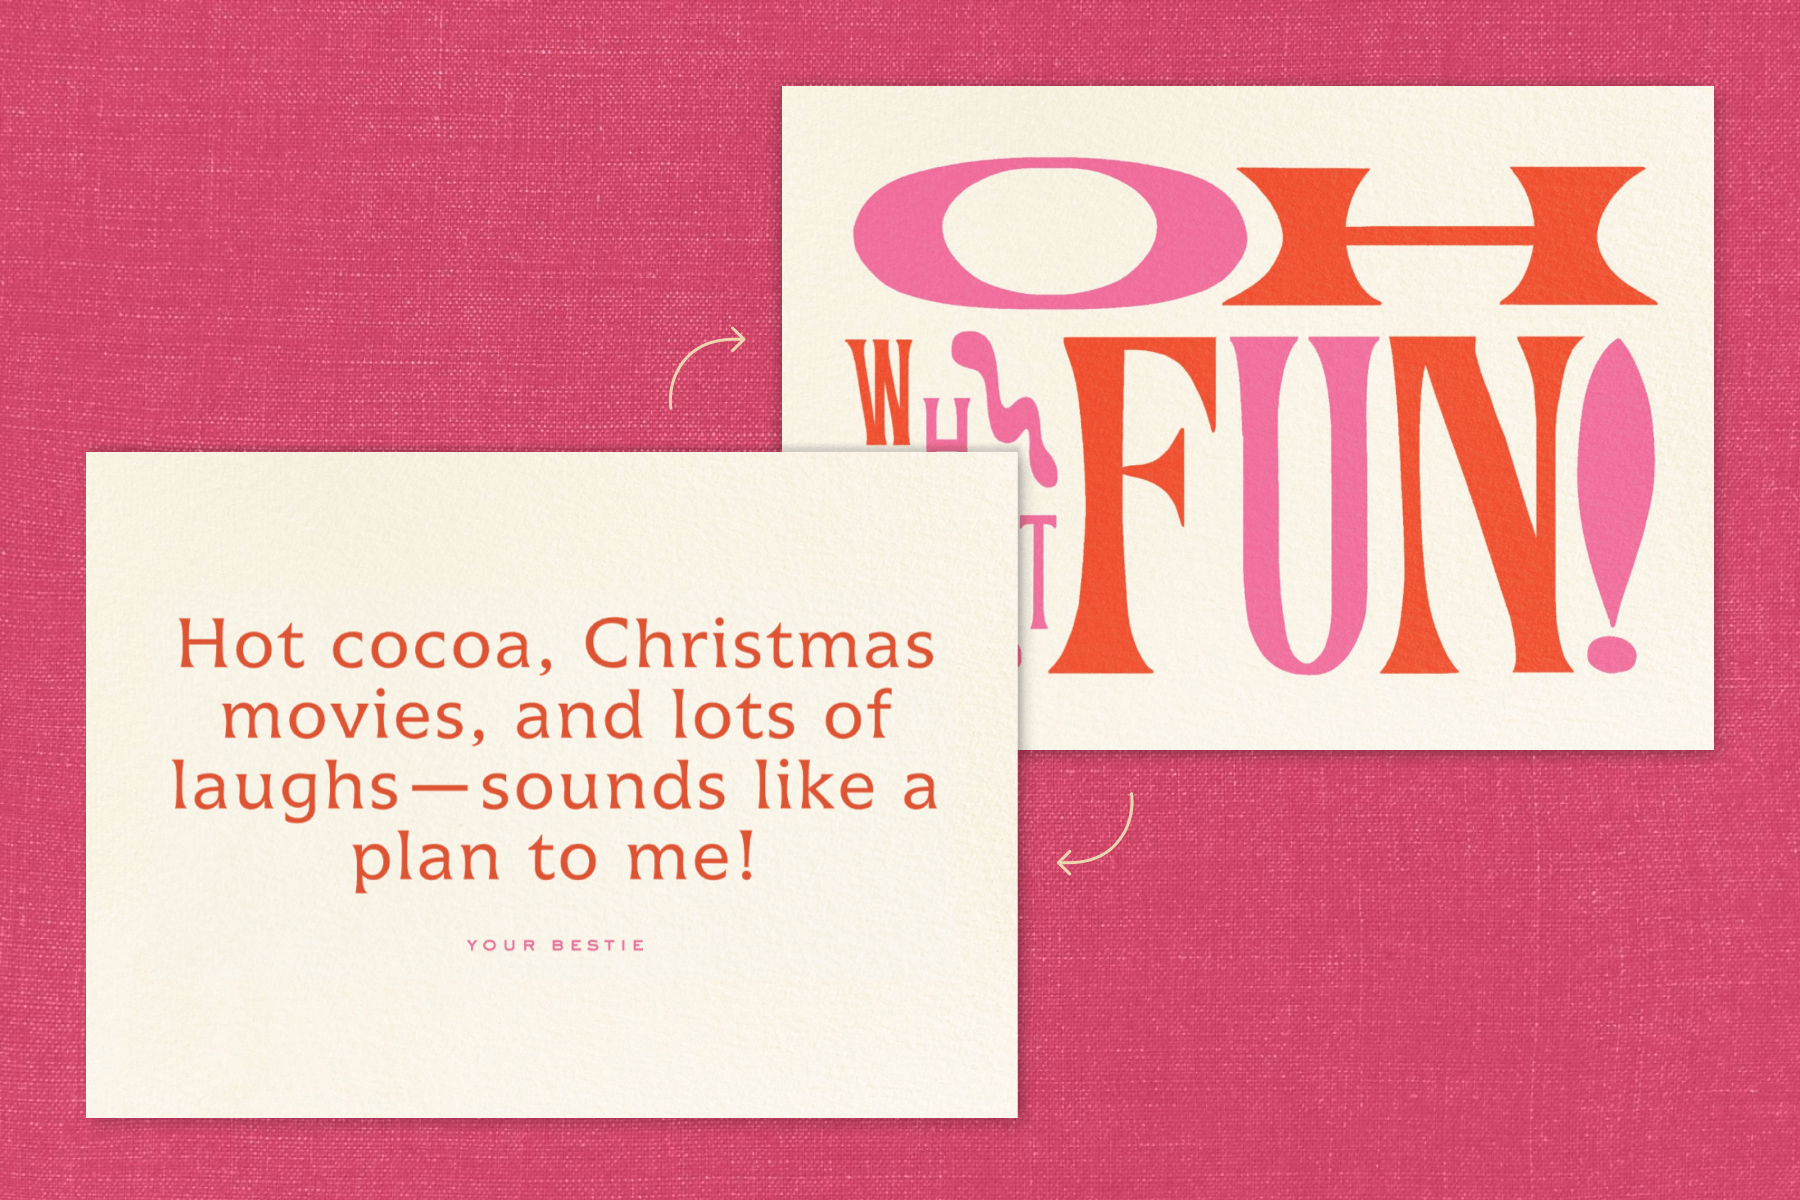 A card reads “OH WHAT FUN!” in pink and orange block letters, while the reverse reads “Season’s greetings to you and yours!”